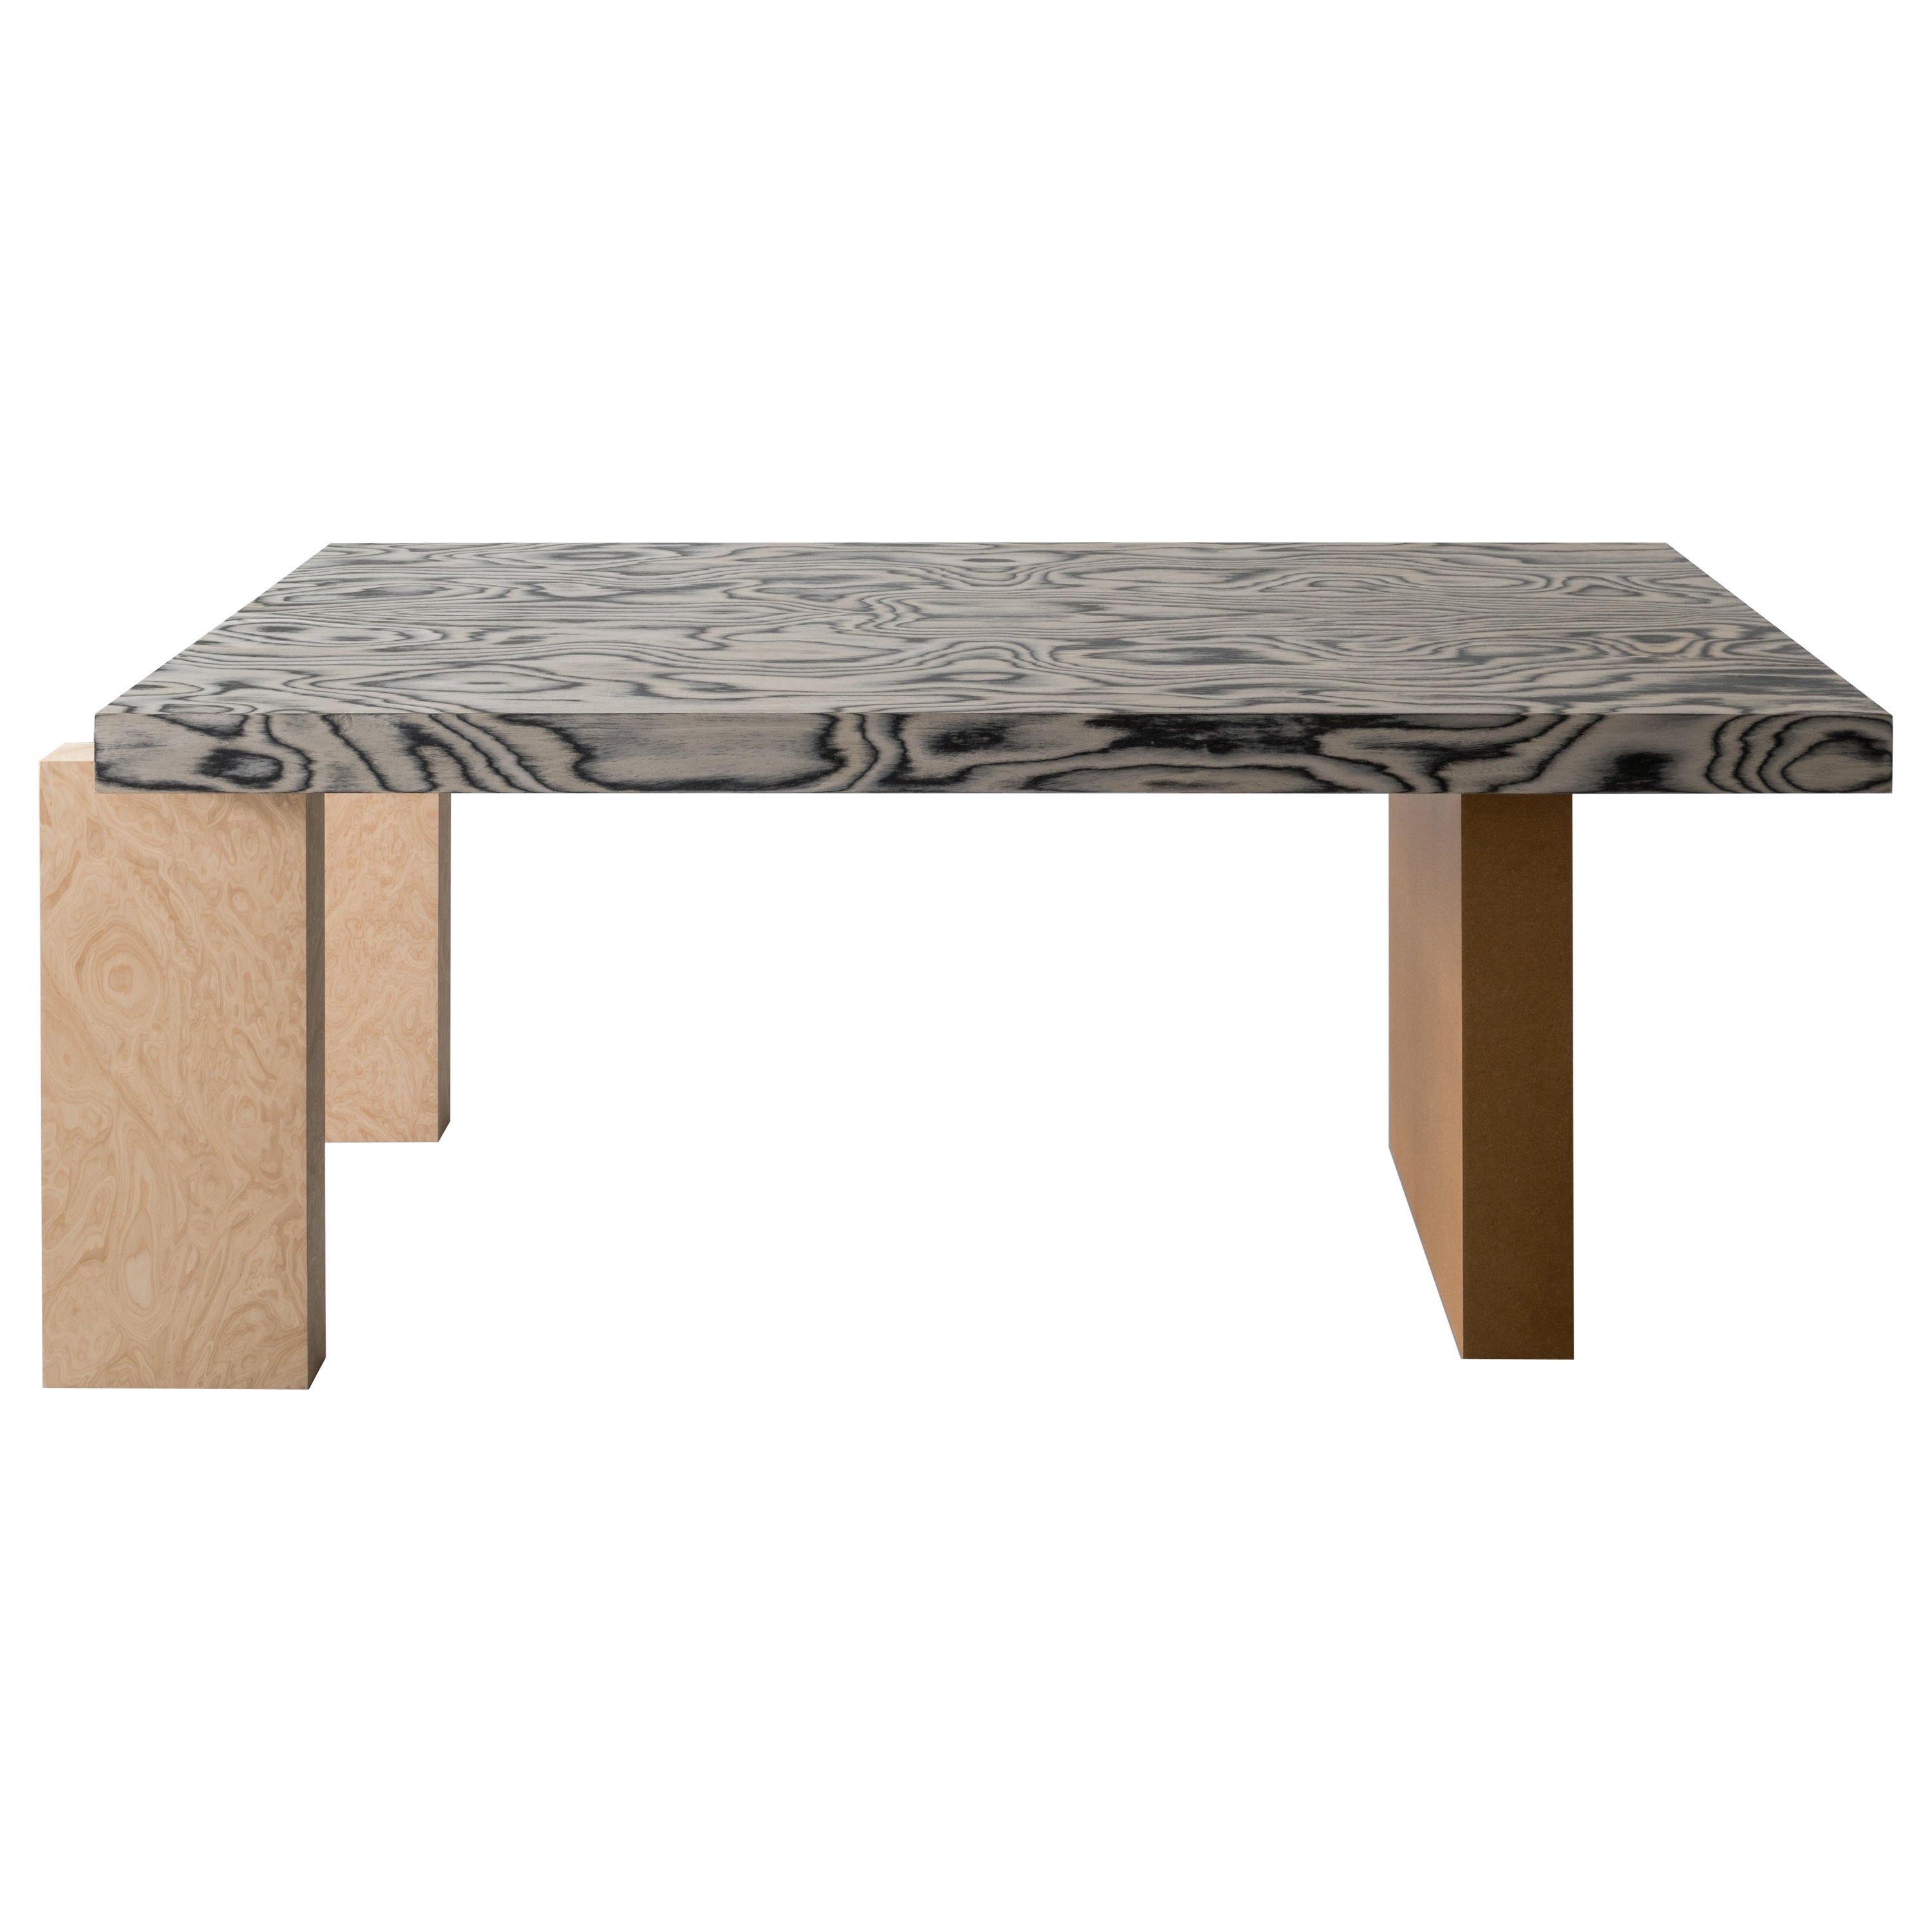 Contemporary Wood Veneered Dining Table with ALPI Sottsass Veneered Table Top